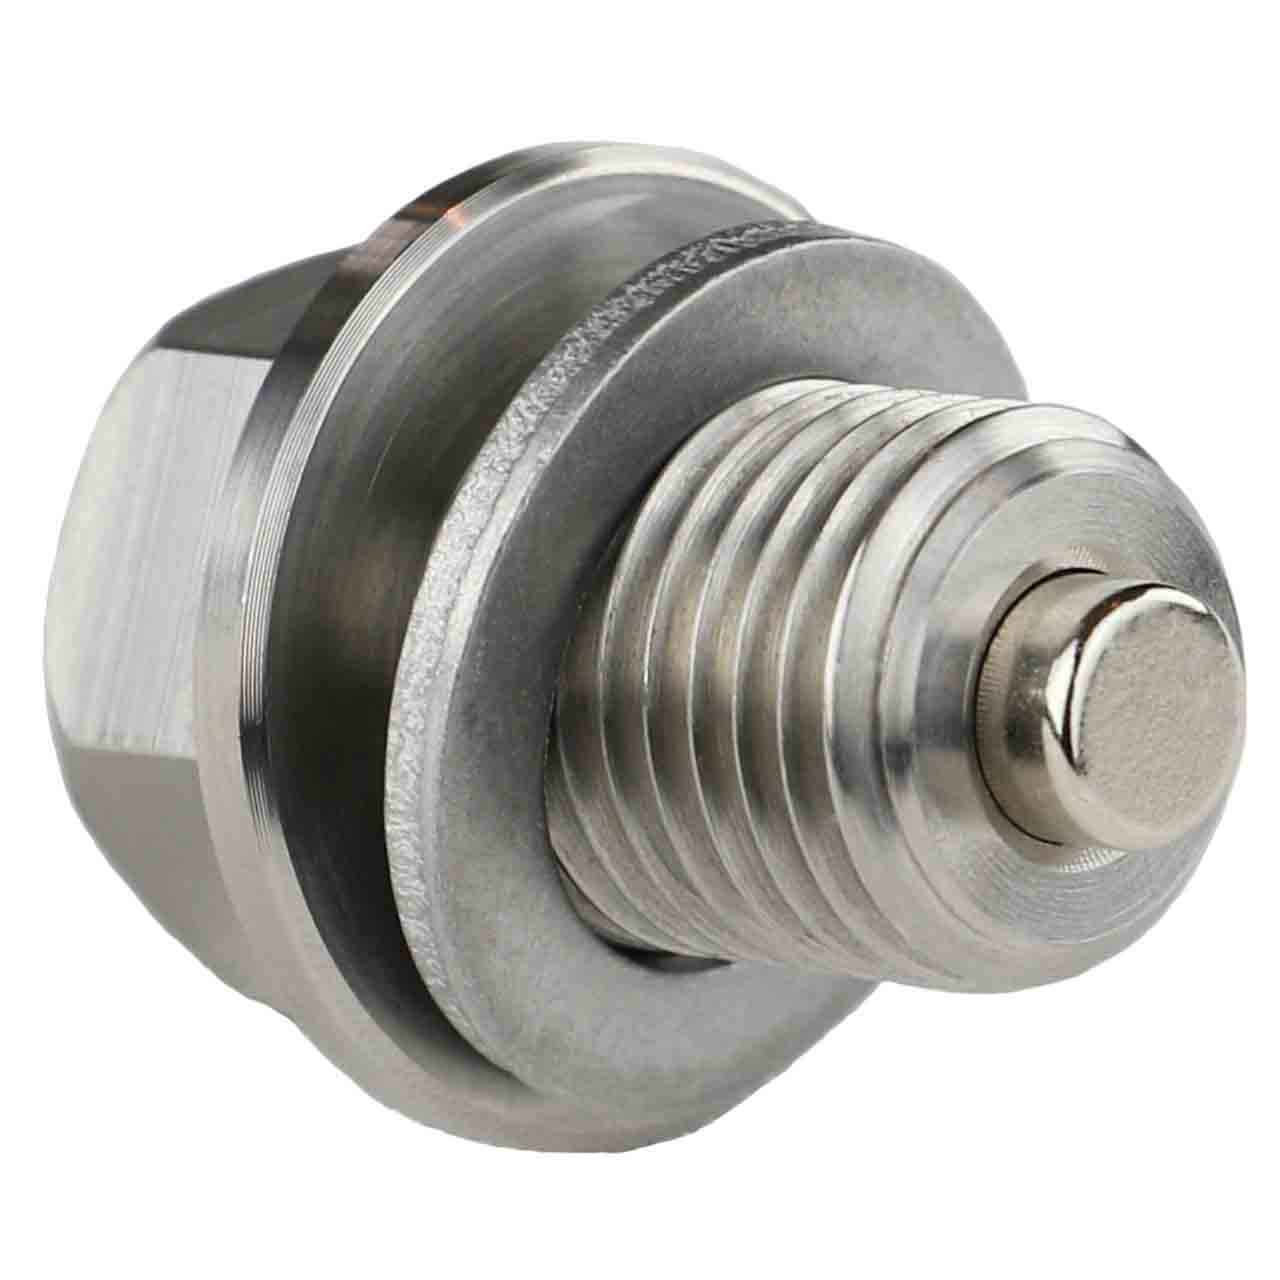 Saturn L300 Magnetic Oil Drain Plug - 2001-2005 - 3.0 Liter - 6 Cylinder - Made In USA - Stainless Steel - Part Number 96041864